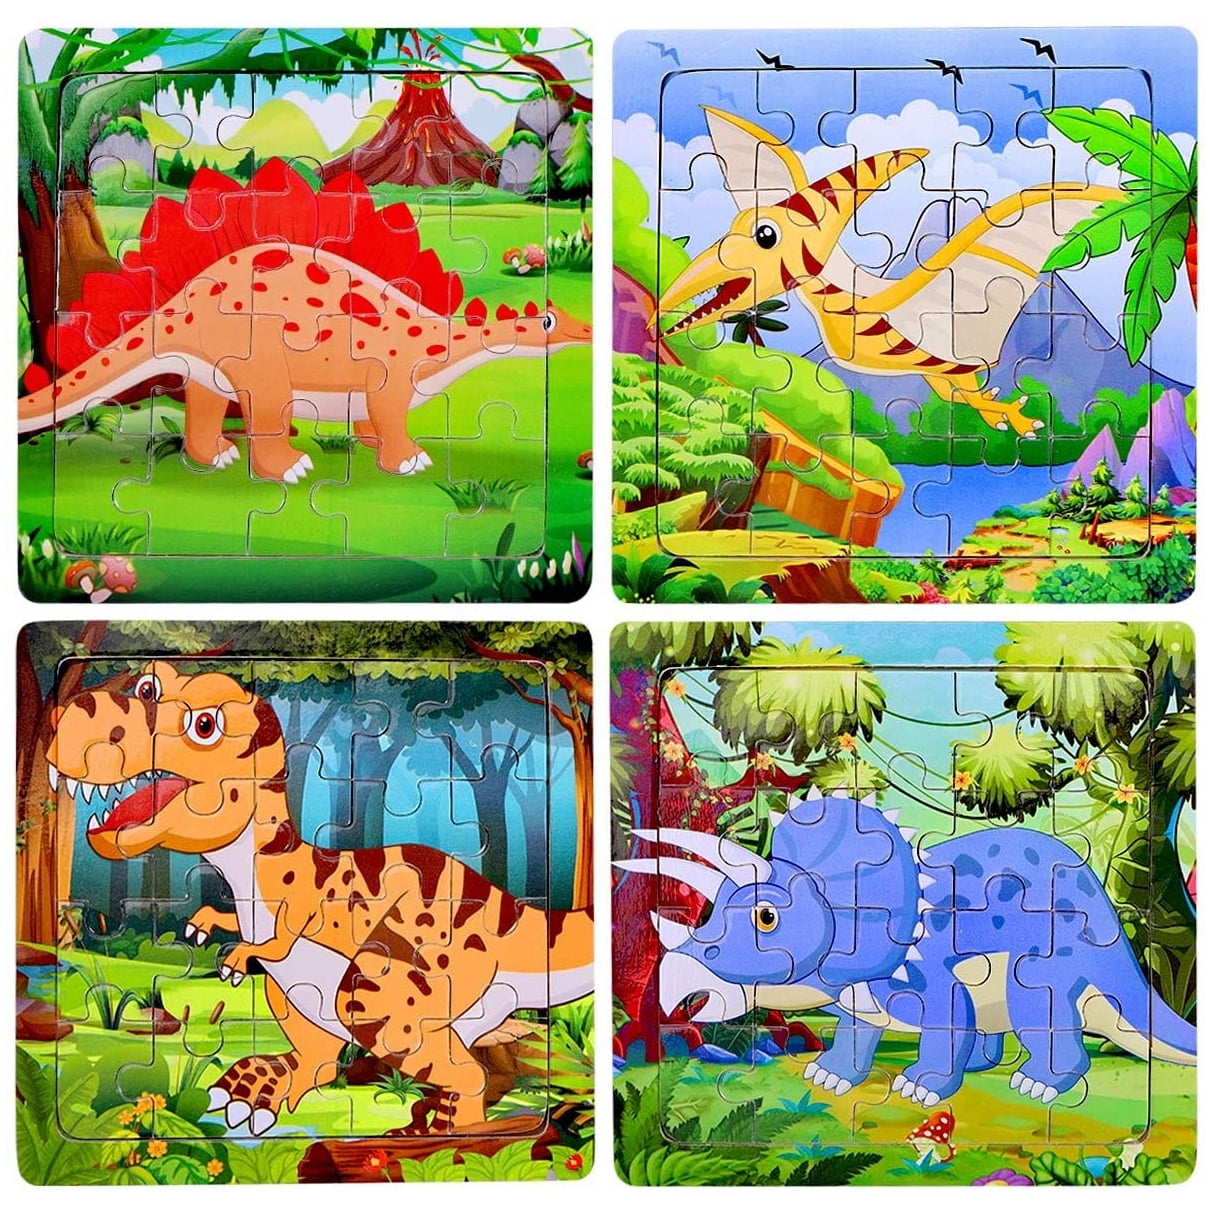 Dinosaur Mermaid Zoo Lot of 4 Doubles Sided Magnetic Preschool Puzzles Ages 3 